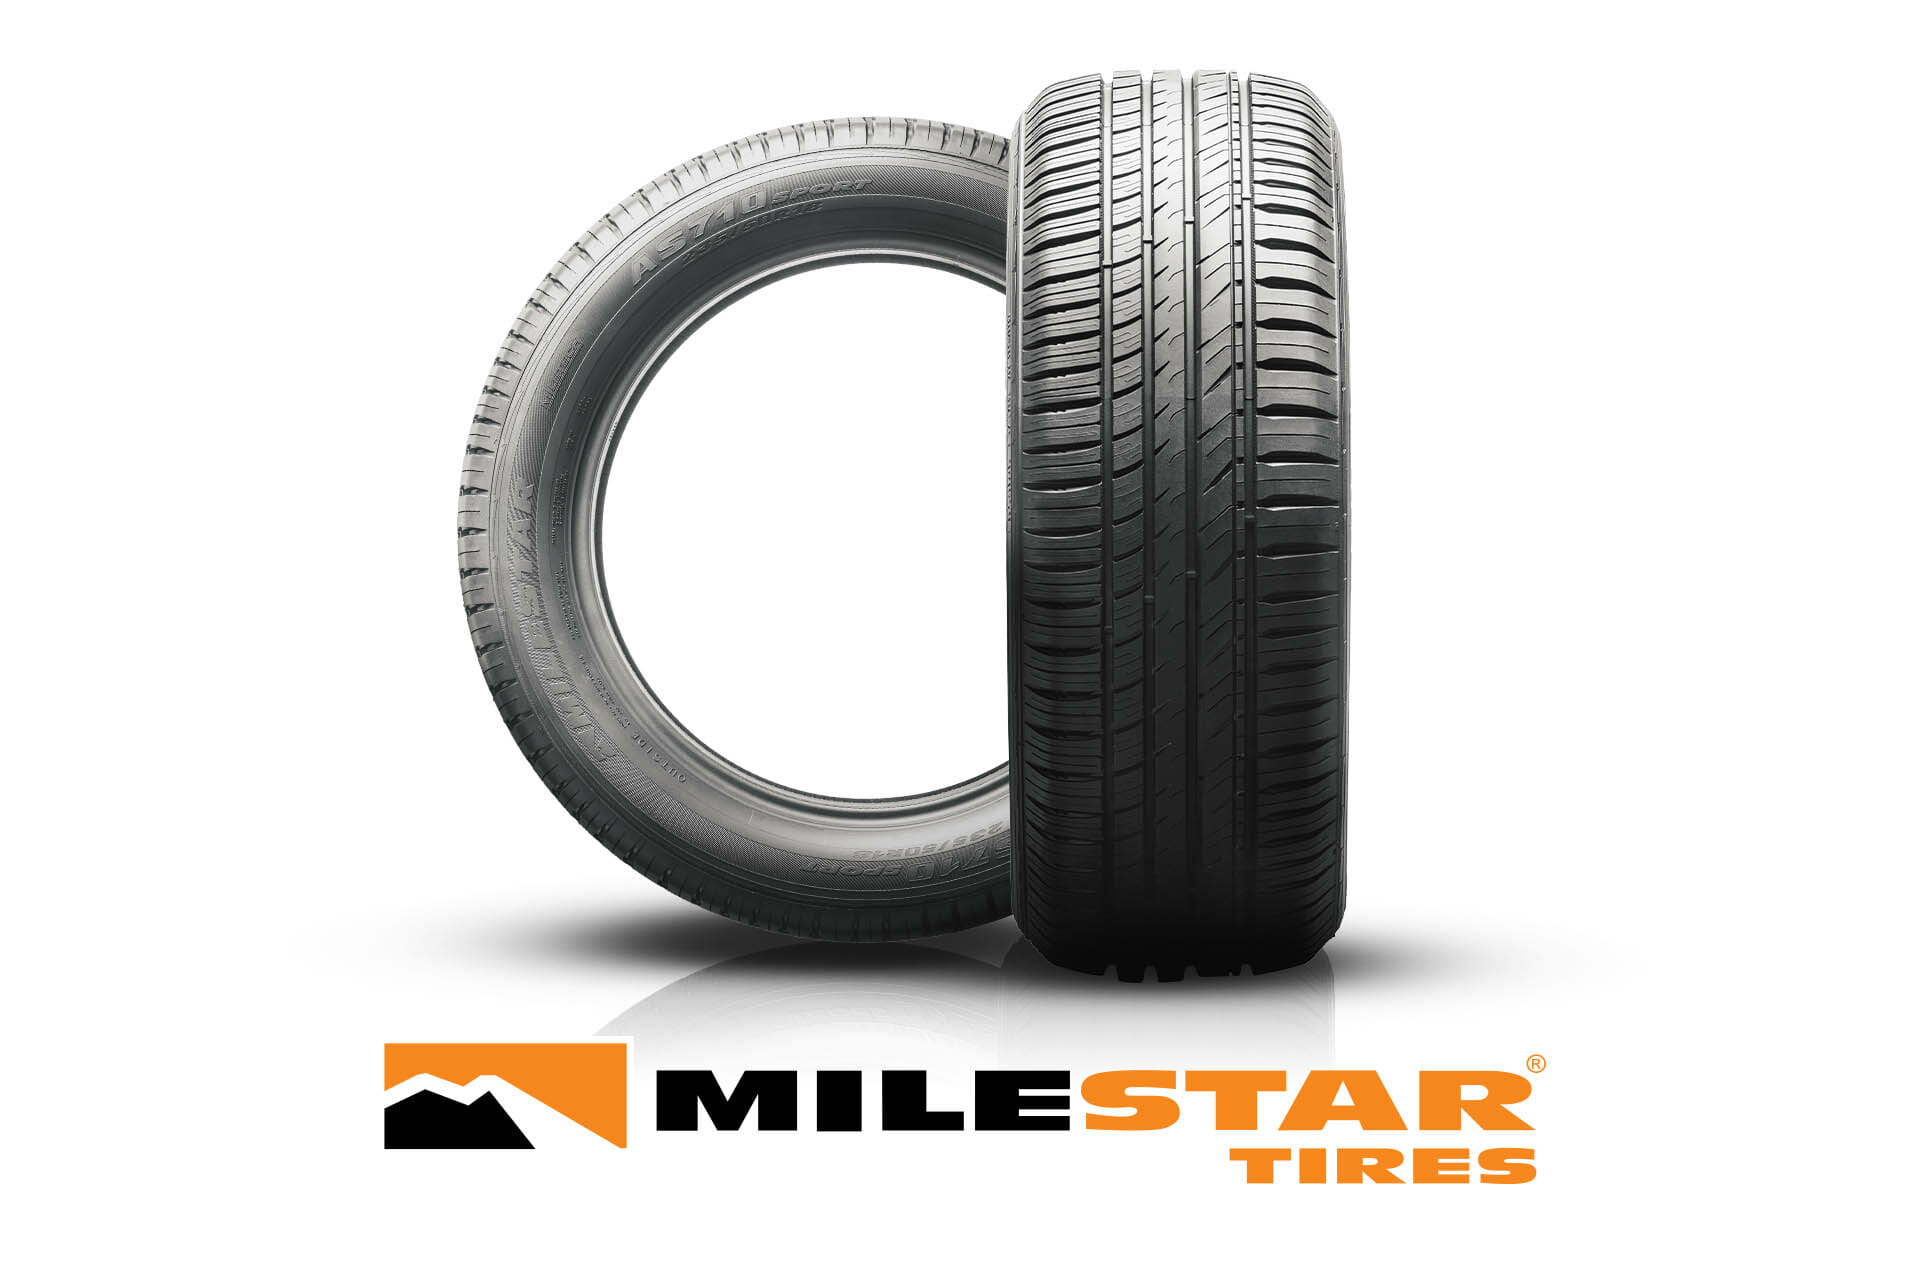 Milestar tires all new AS710 All season tire made in the USA